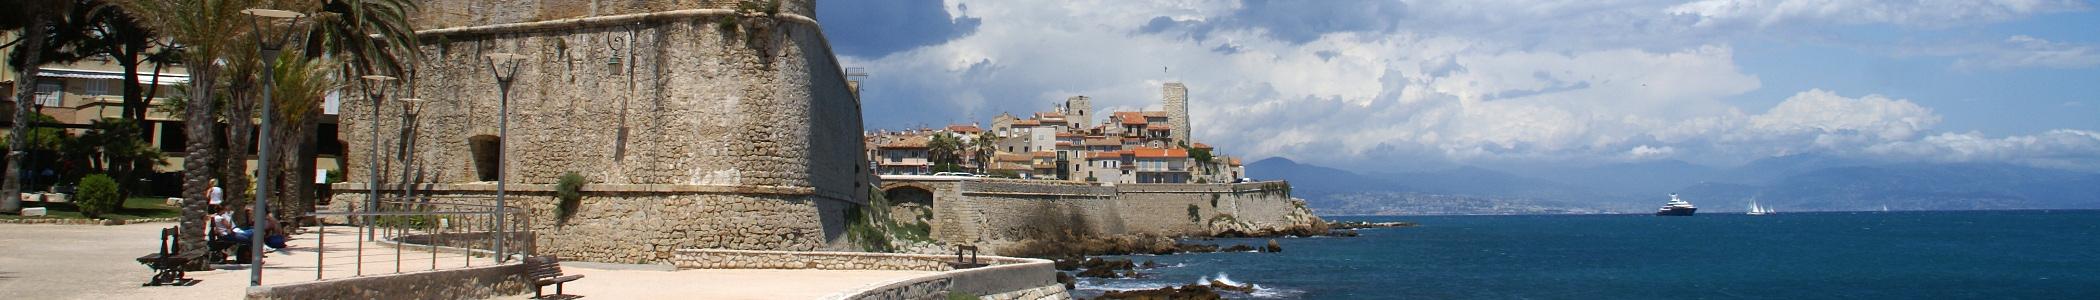 Banner image for Antibes on GigsGuide